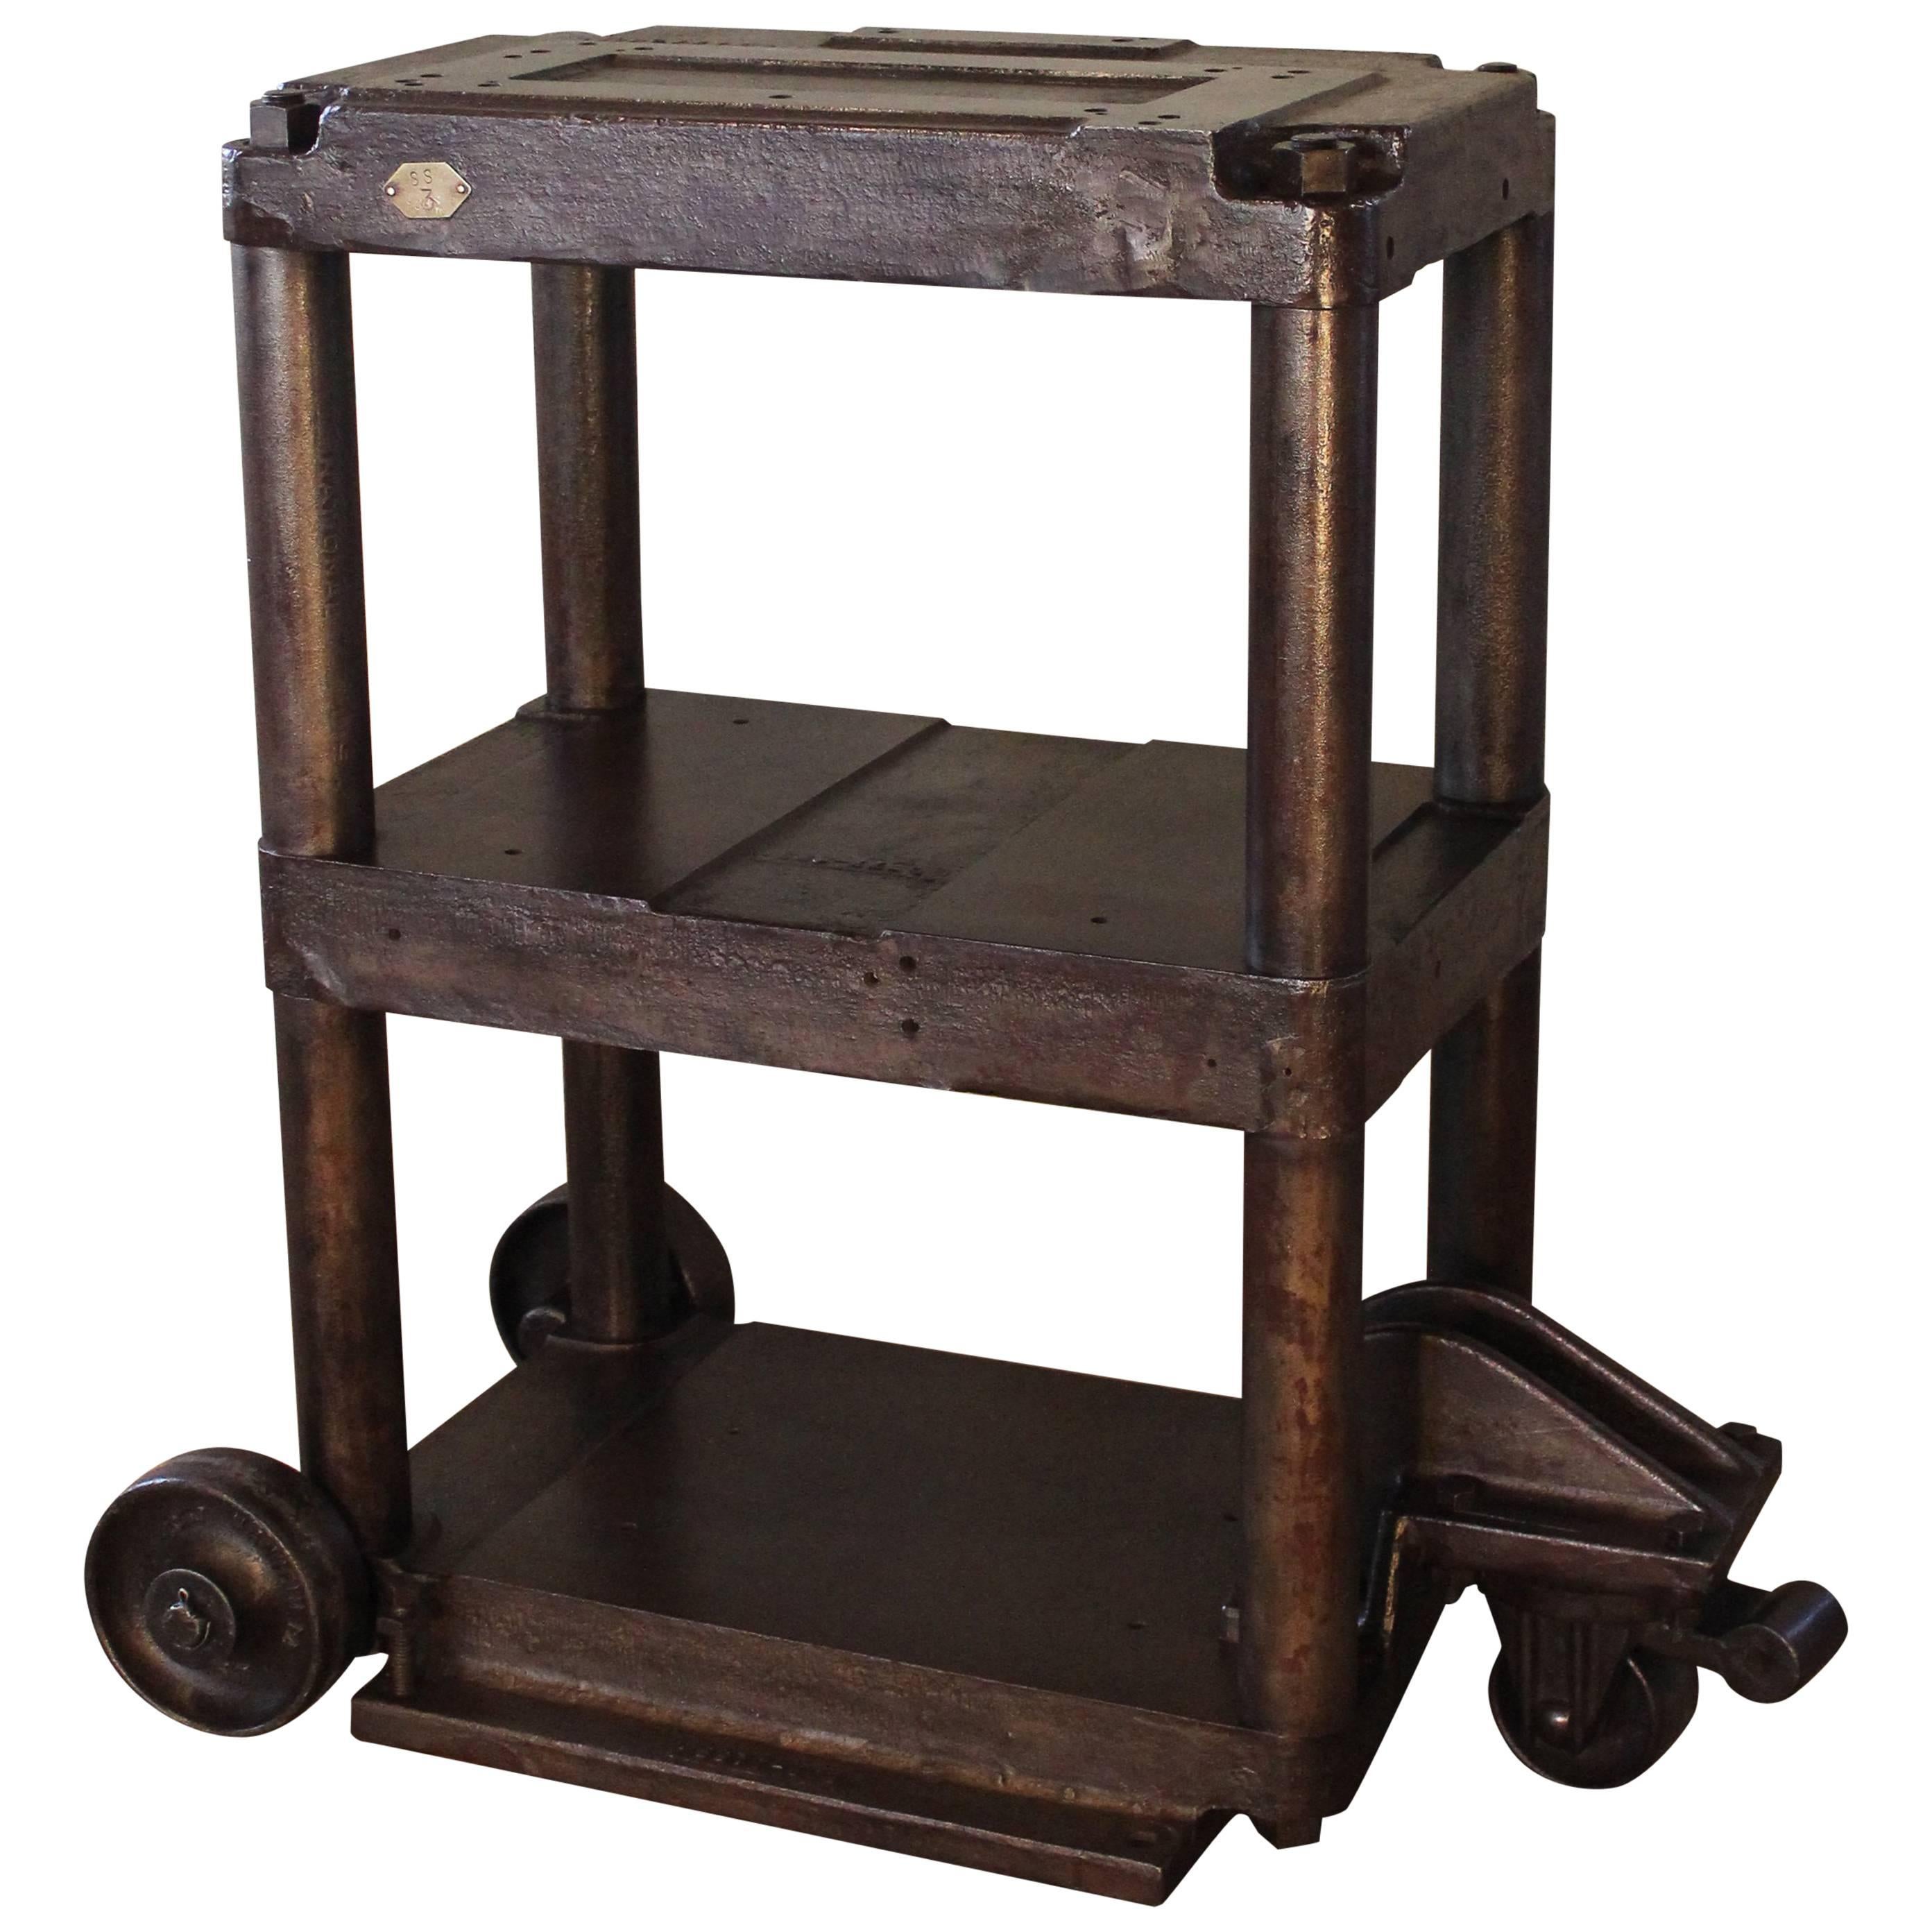 Steel Table Rolling Cart Vintage Industrial Three-Tier Factory Cast Iron 